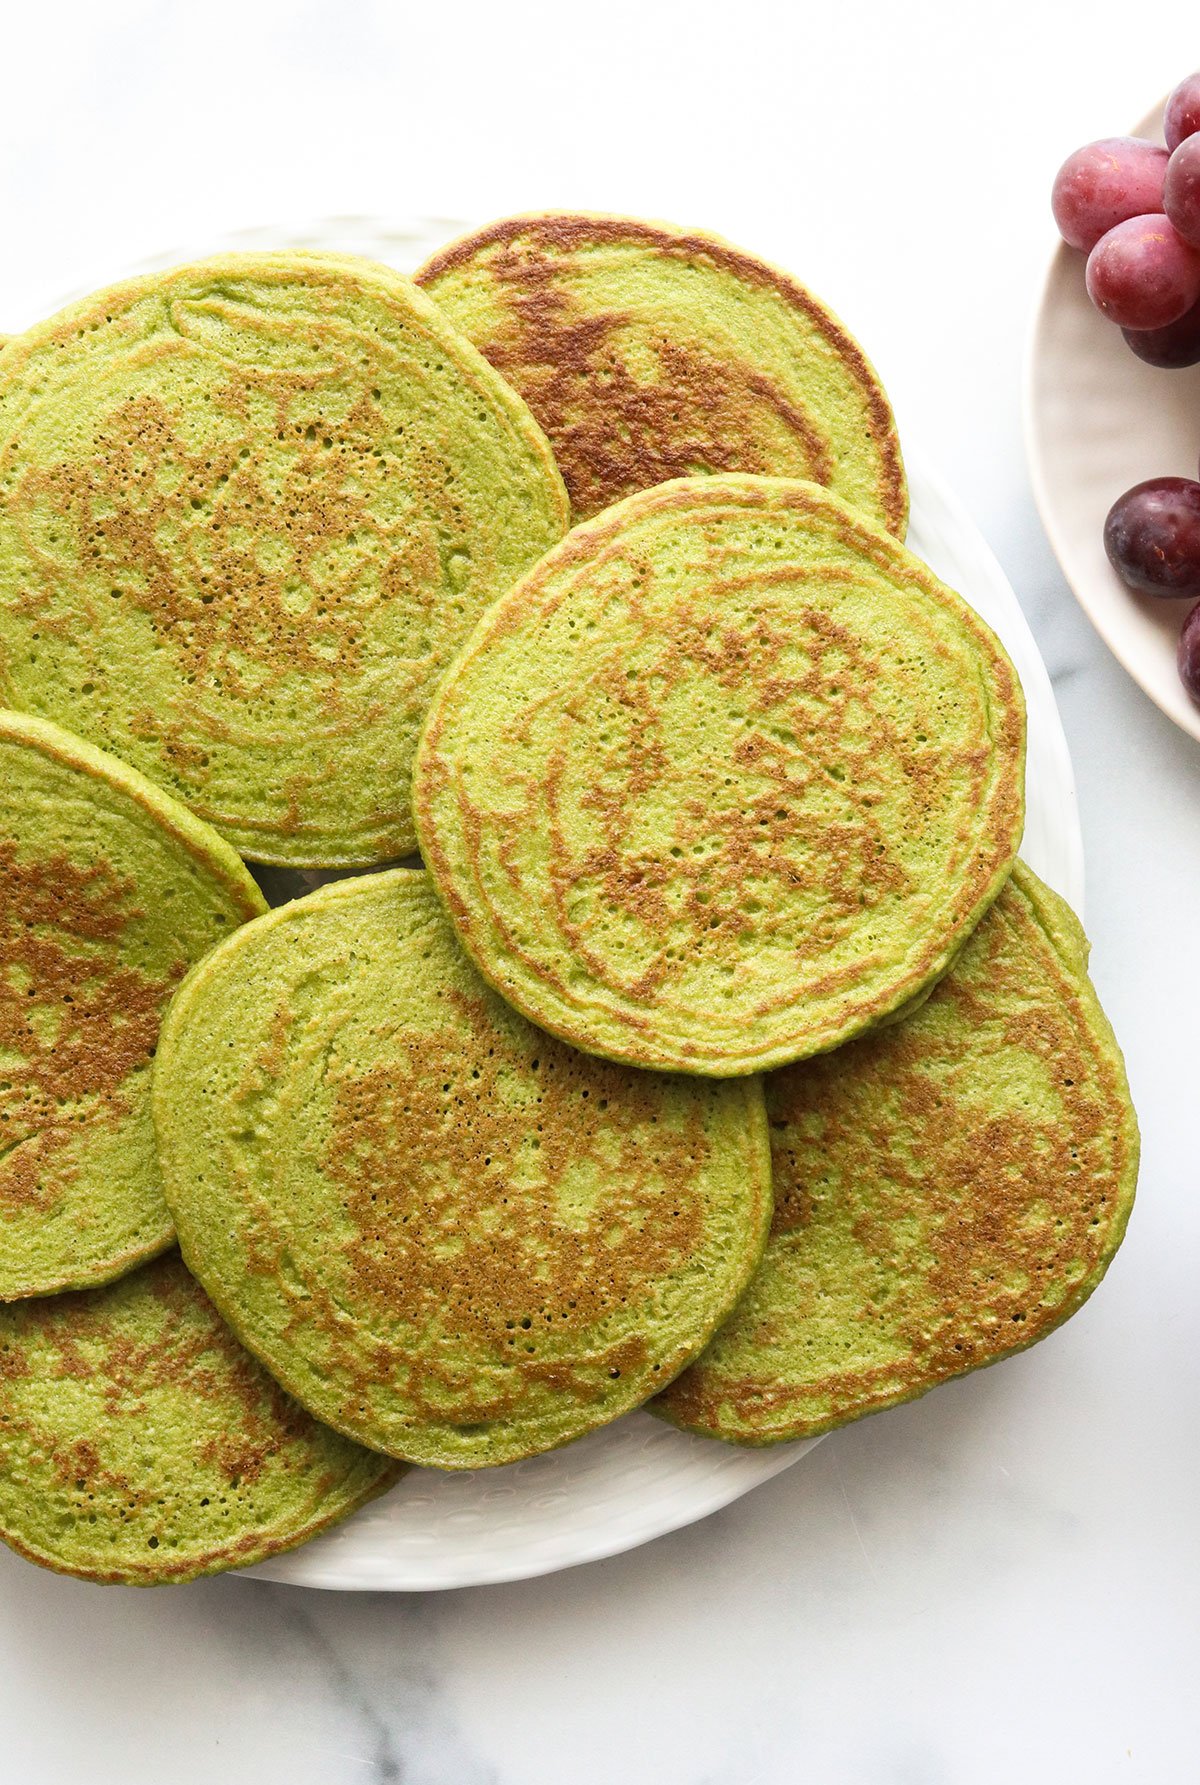 spinach pancakes arranged on a white plate overhead.